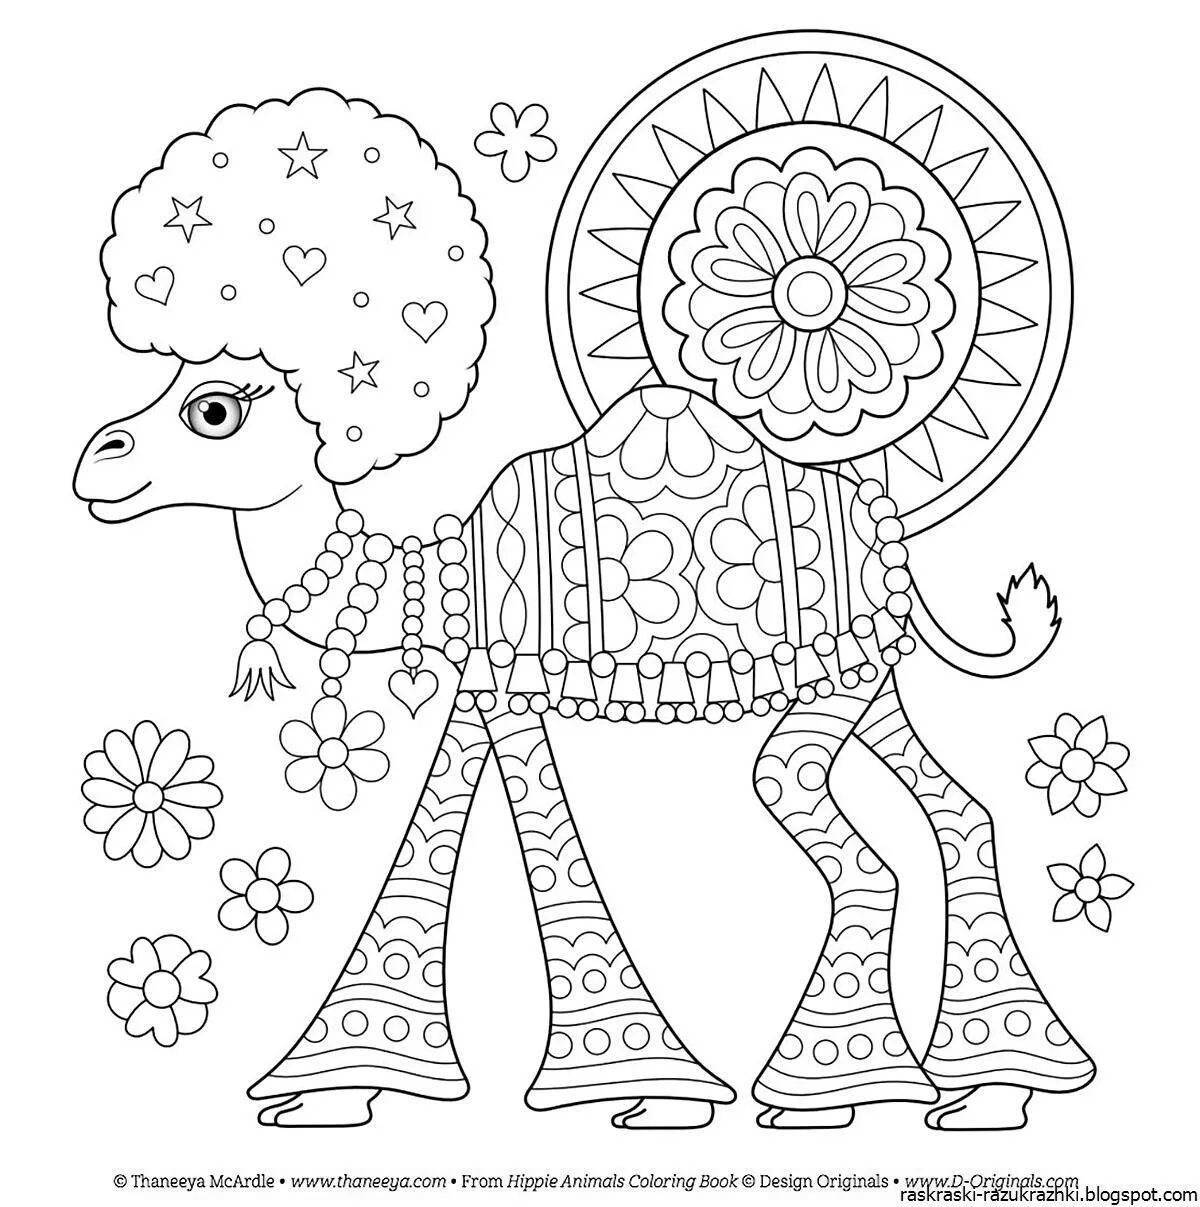 Creative anti-stress coloring book for children 5 years old